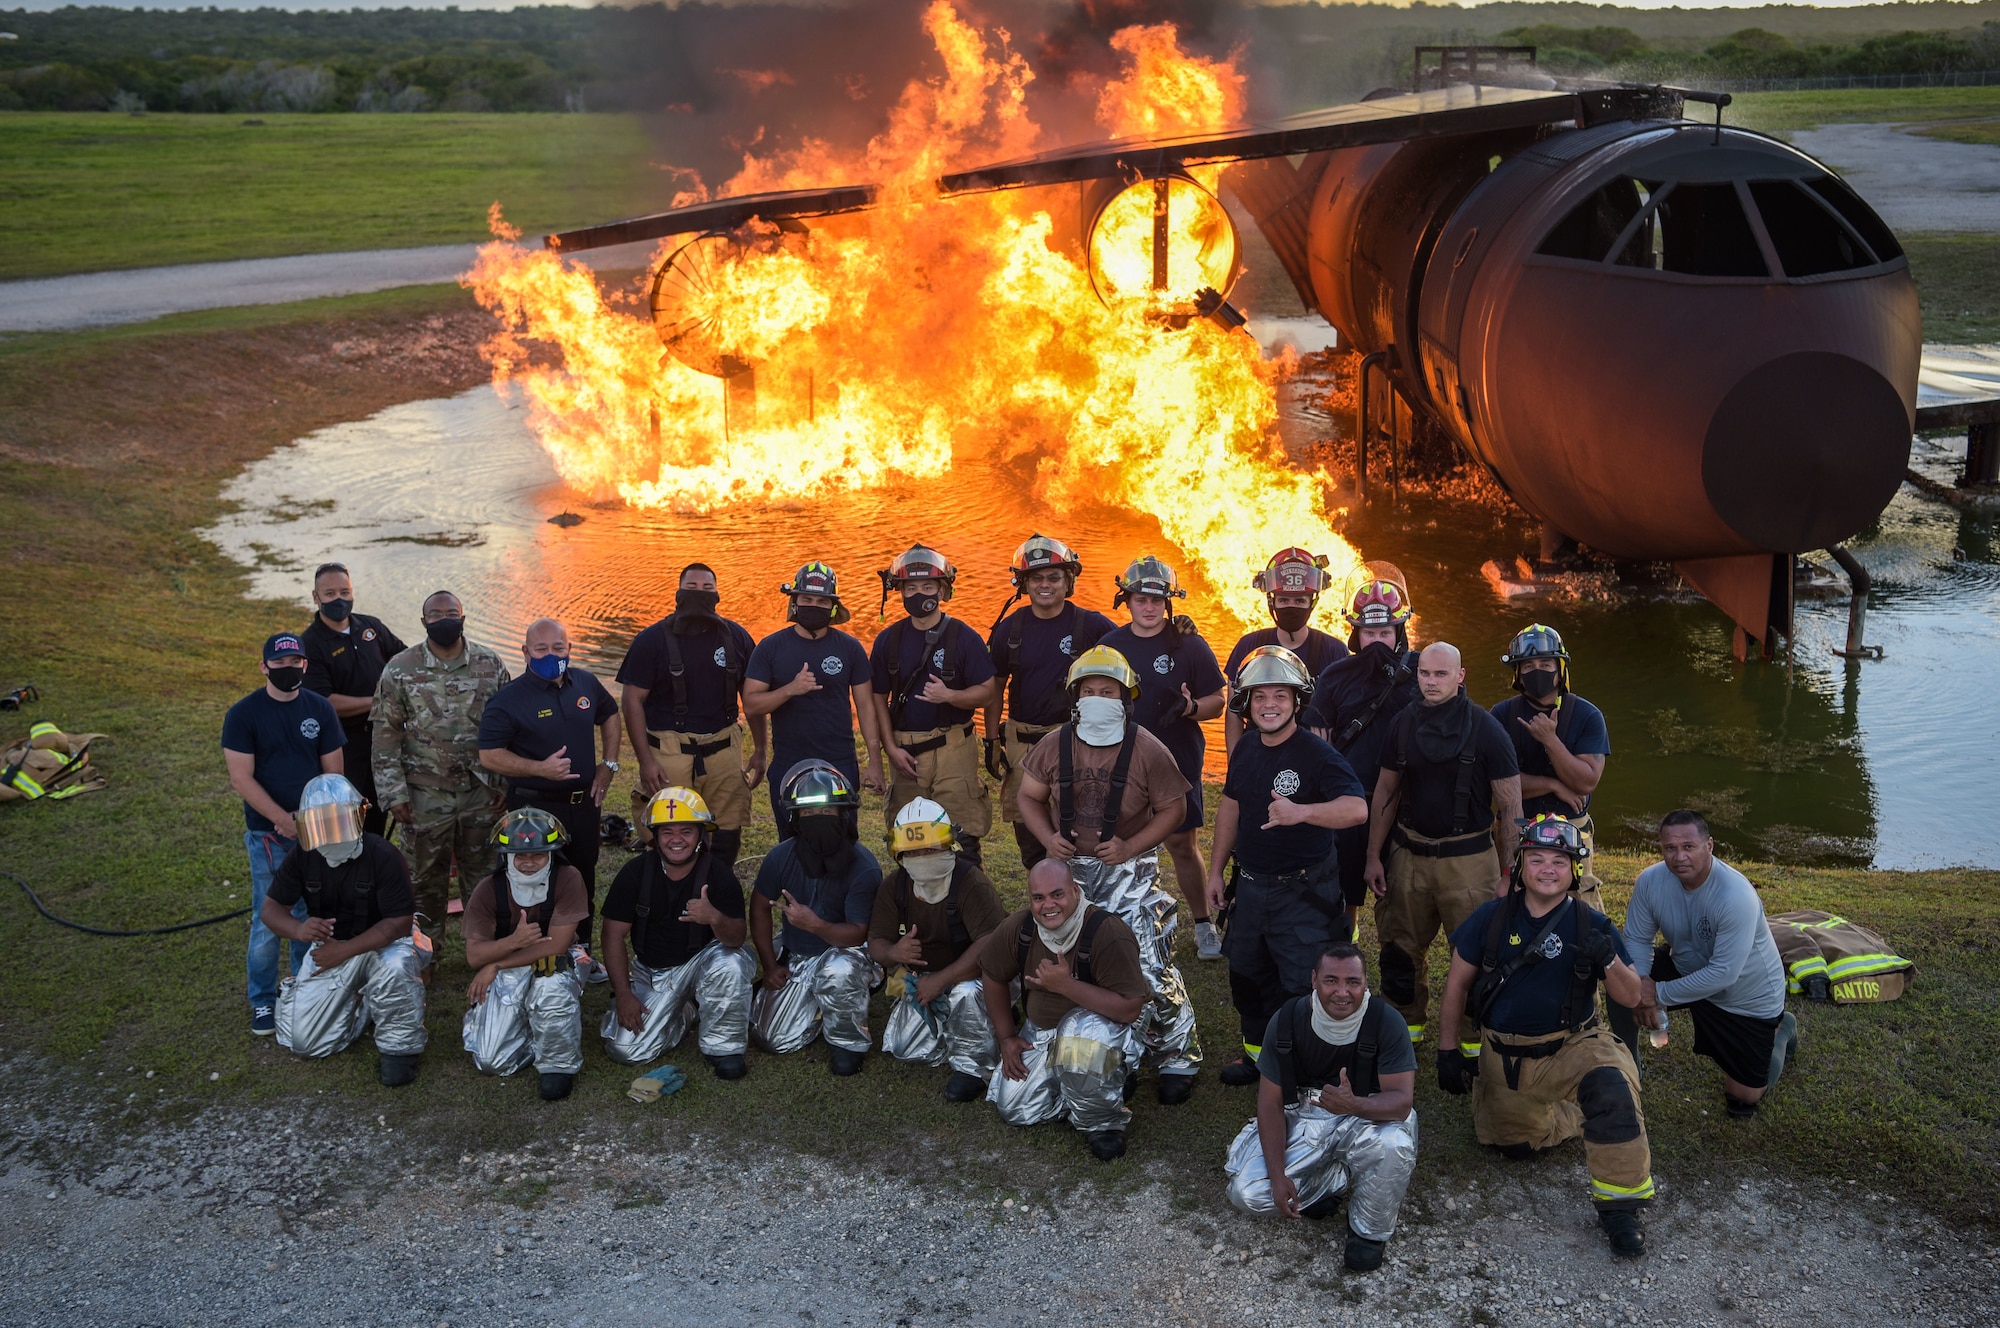 U.S. Air Force and Palau firefighters pose for a picture during joint aircraft fire training at Andersen Air Force Base, Guam, May 11, 2021.